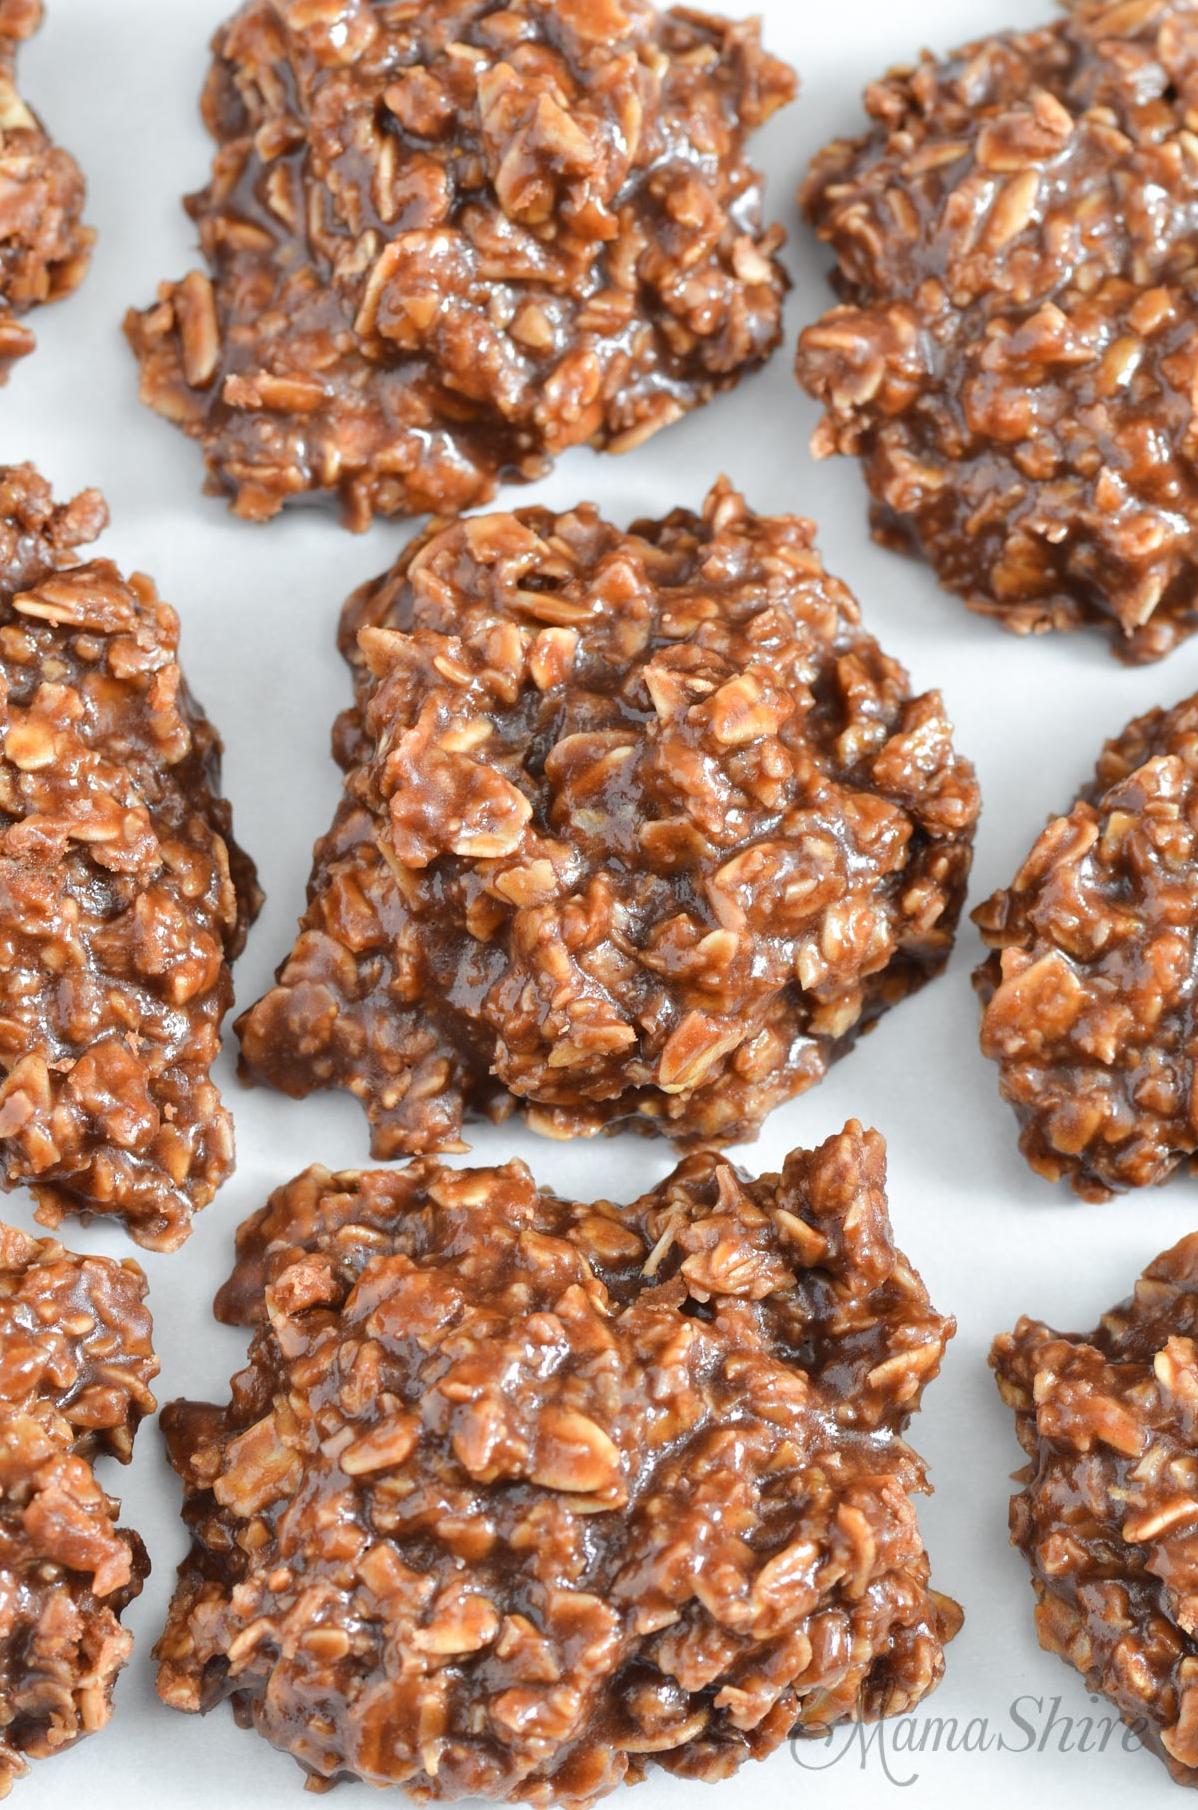 Delicious and Nutritious Gluten-Free Chocolate Oat Cookies